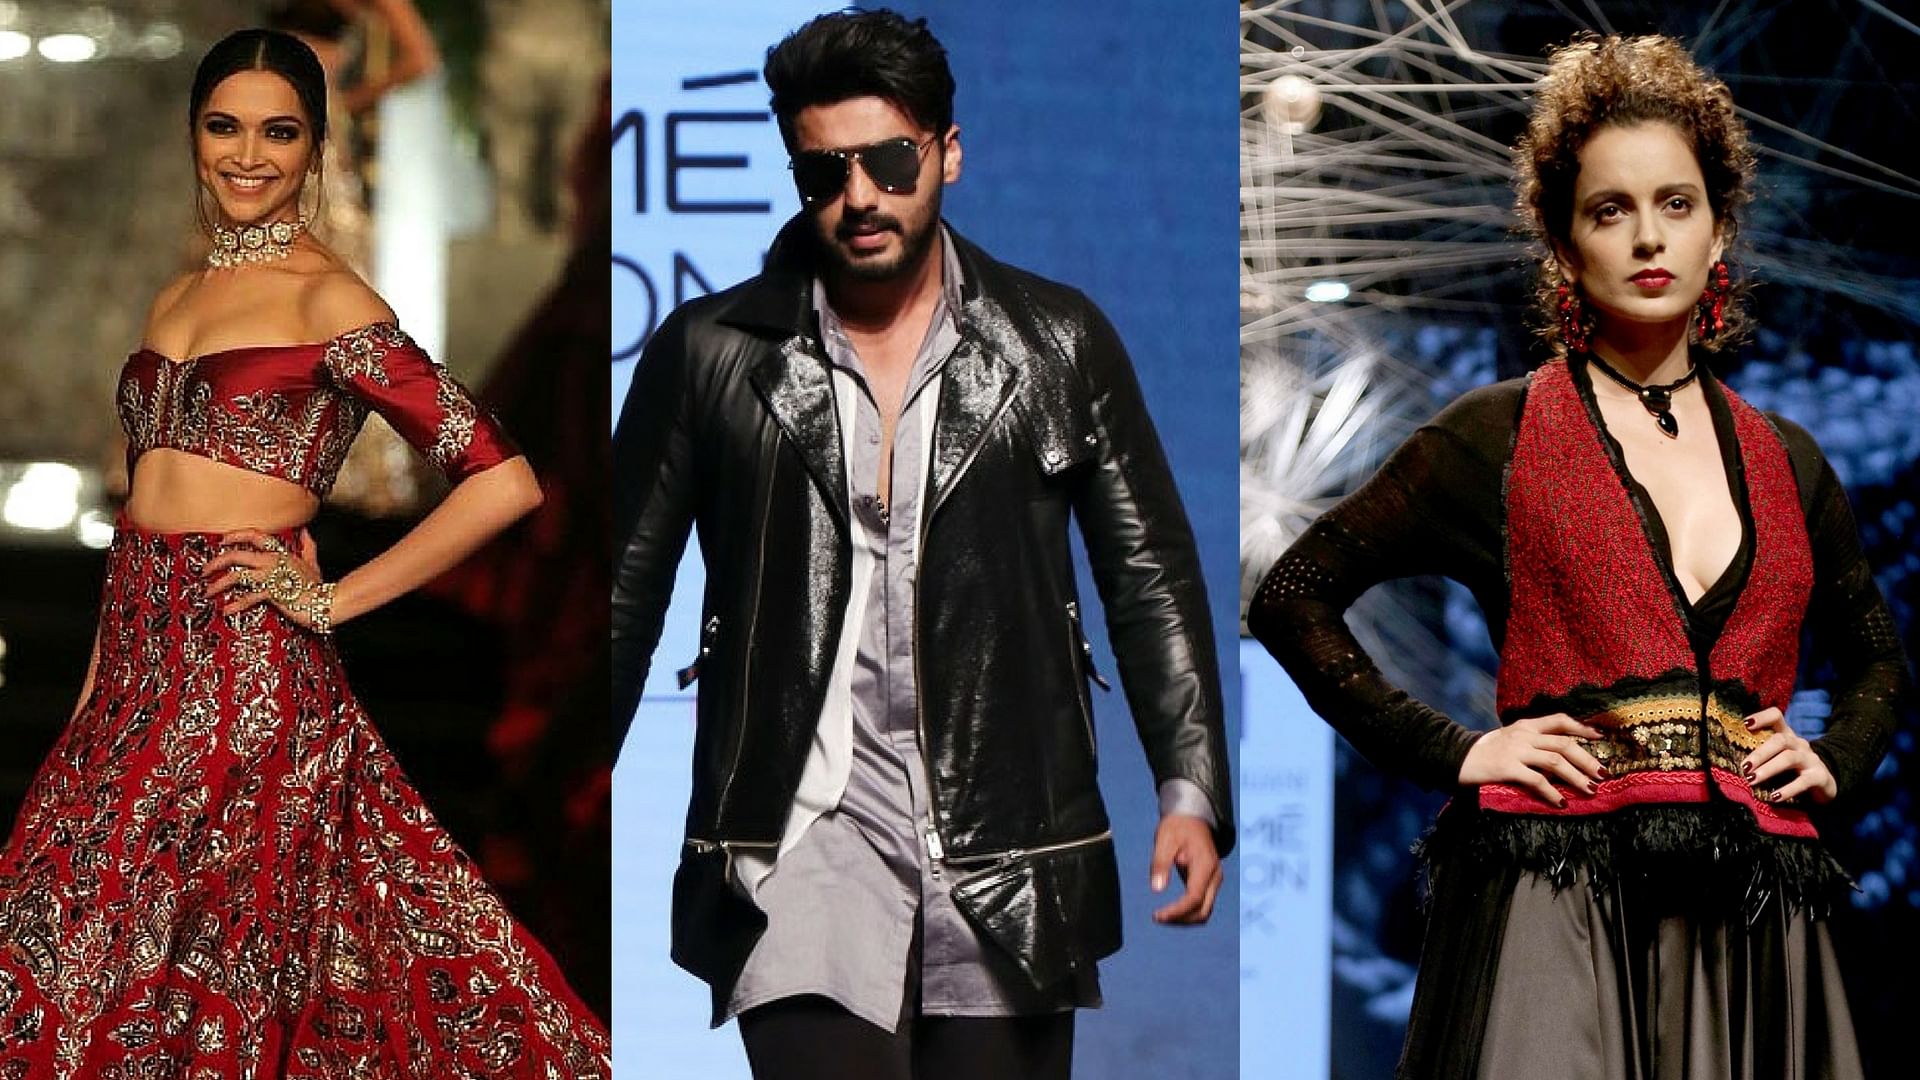 Deepika Padukone, Arjun Kapoor and Kangana Ranaut are not afraid to take a stand on issues they believe in. (Photo courtesy: <a href="https://twitter.com/afdiaries/media">Twitter/@afdiaries</a>)/  Yogen Shah)